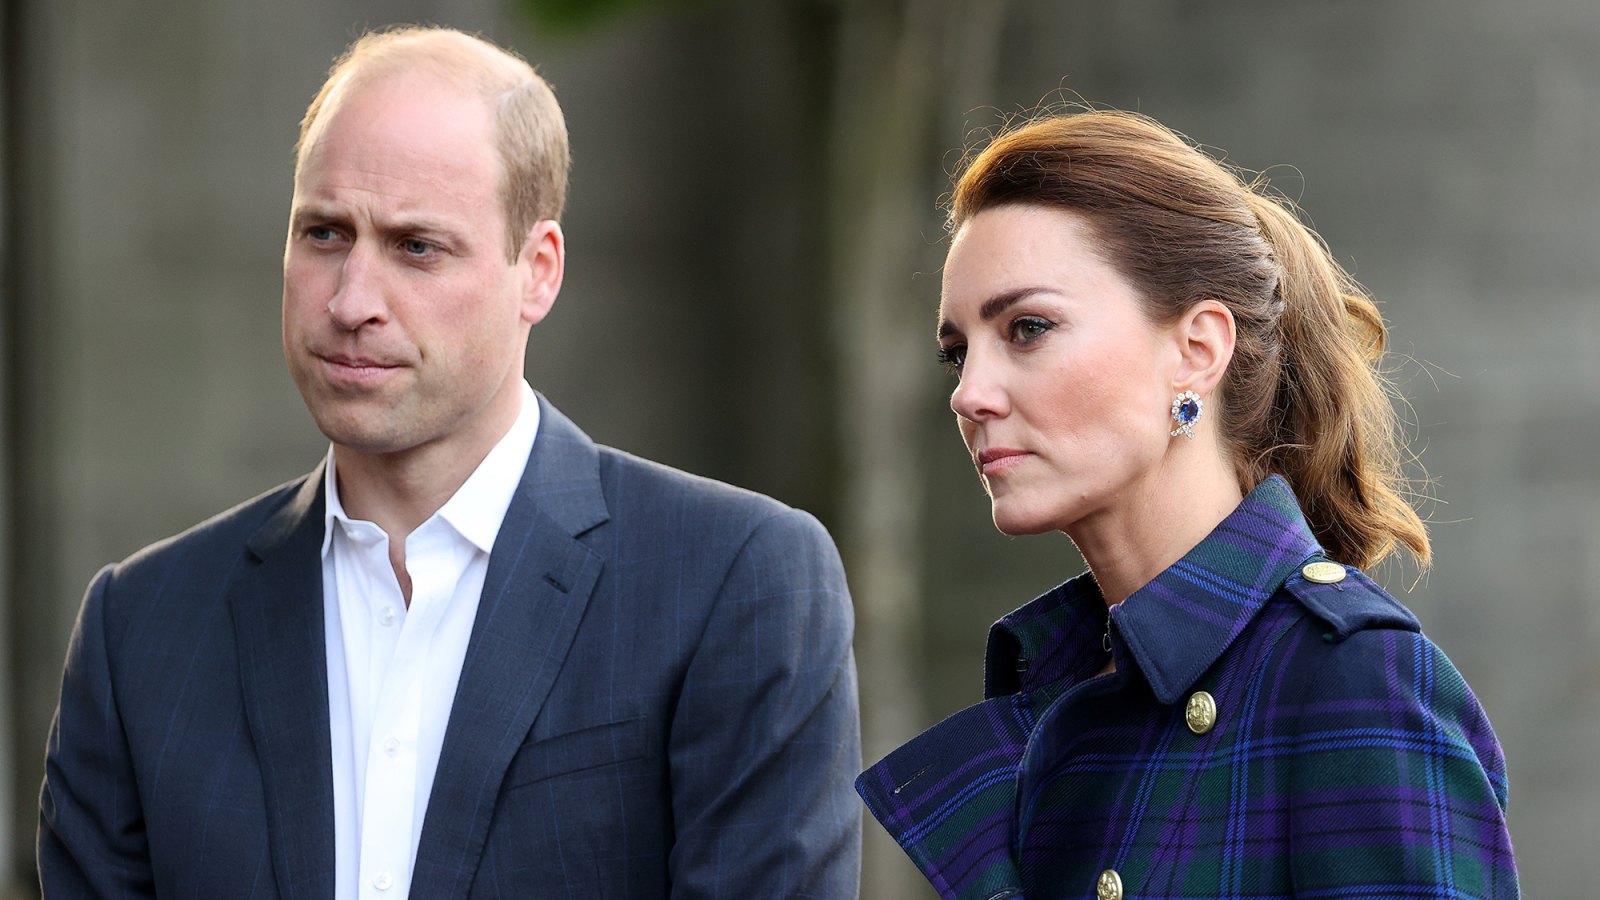 Prince William and Duchess Kate Cancel 1st Stop on Caribbean Tour Amid Protests